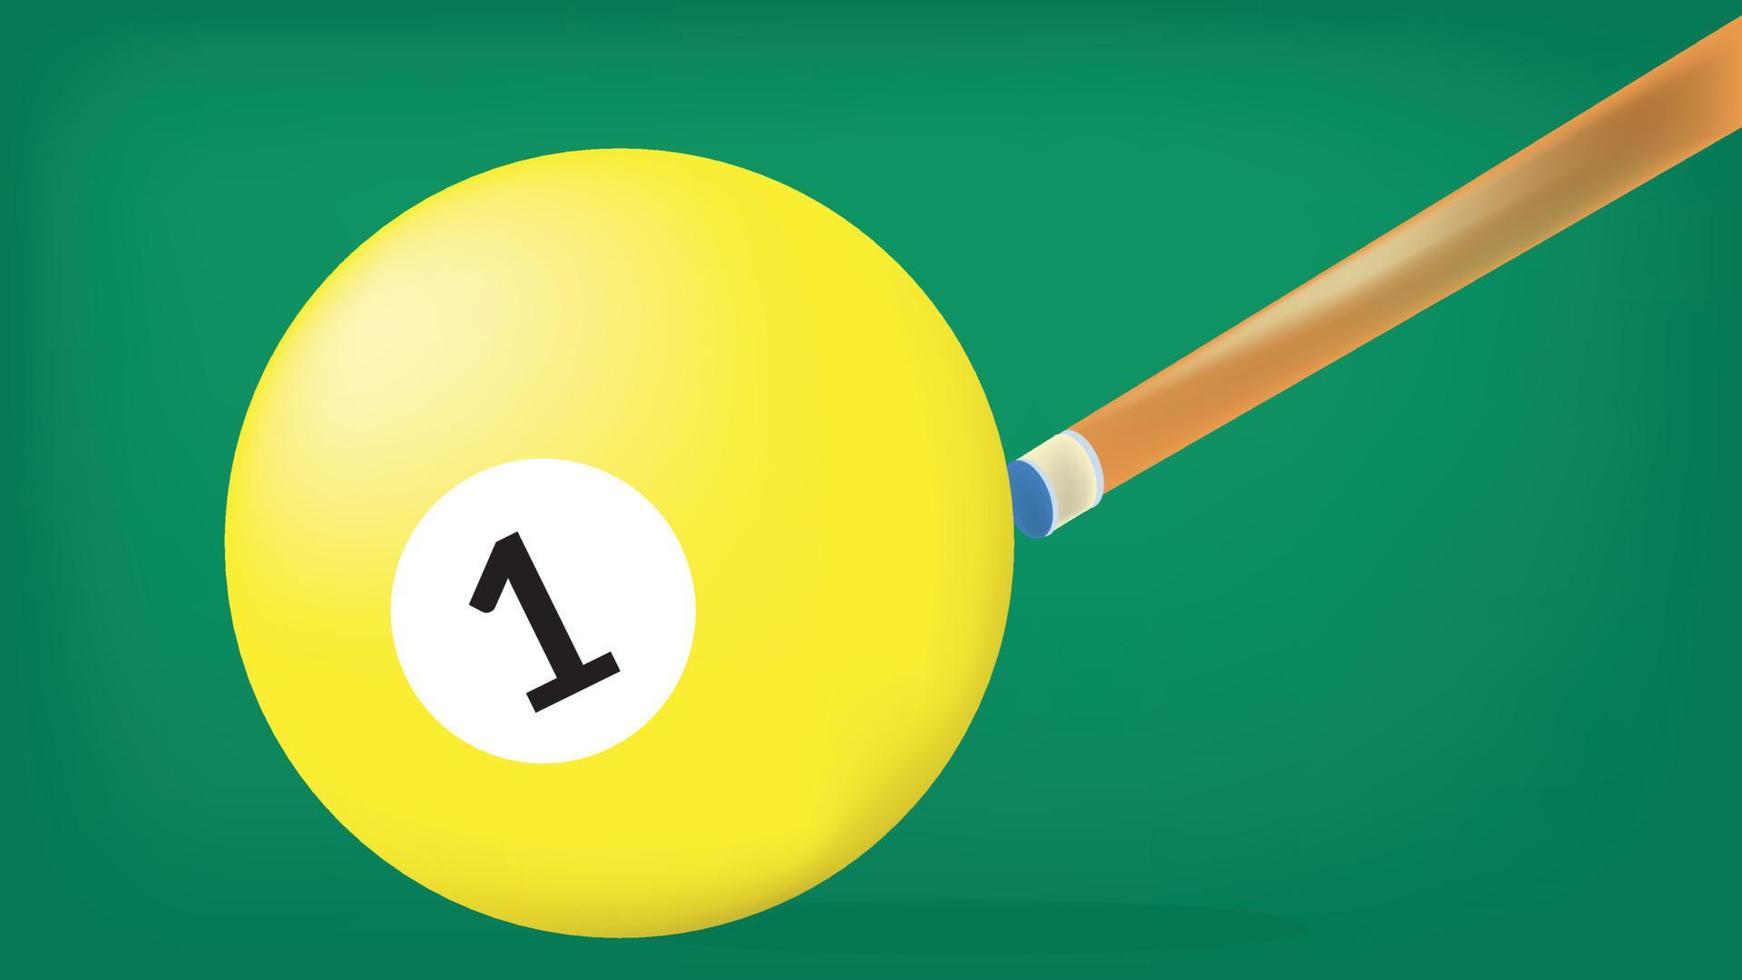 macro number 1 Billiard ball with stick vector illustration. perfect for tournament poster and banner.